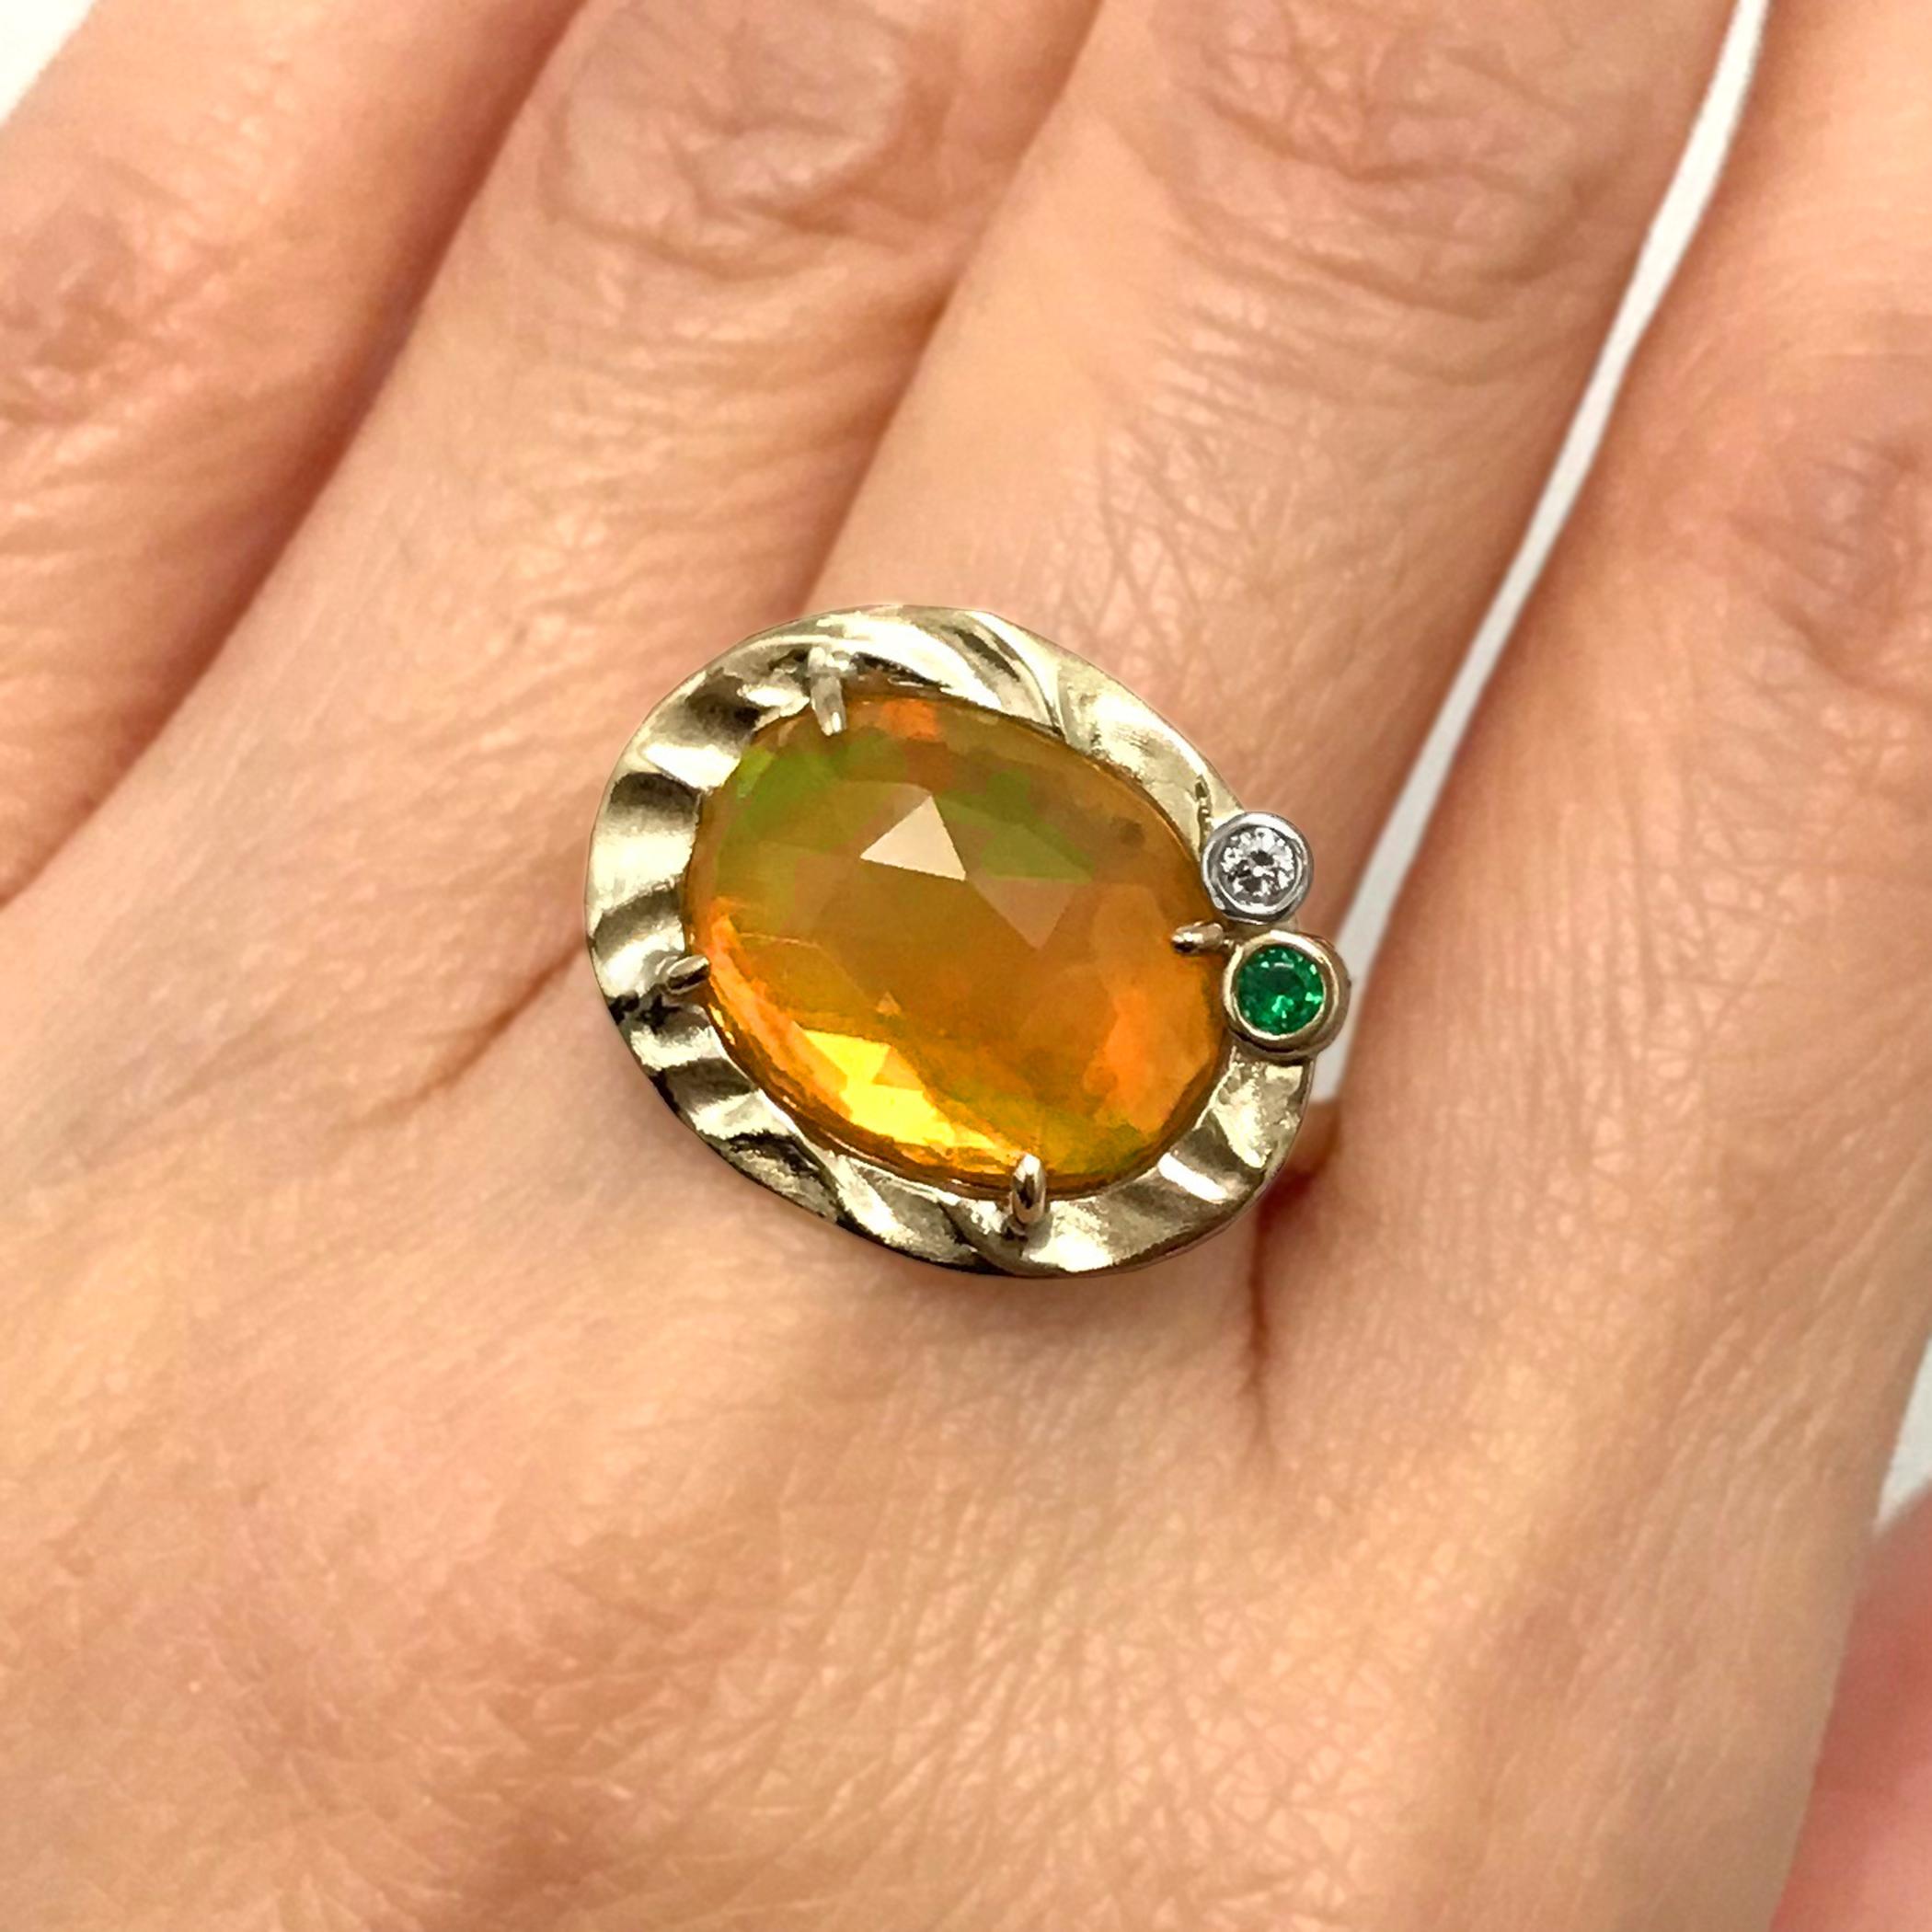 K.Mita's contemporary Dreamy Dawn Ring, which is handmade from 14 Karat Yellow Gold, features a 2.42 Carat Ethiopian Opal (16mm at its widest) accented with a 0.02 Carat Diamond and a 0.045 Carat Green Garnet. The shank is only 2.3mm wide. Ring Size